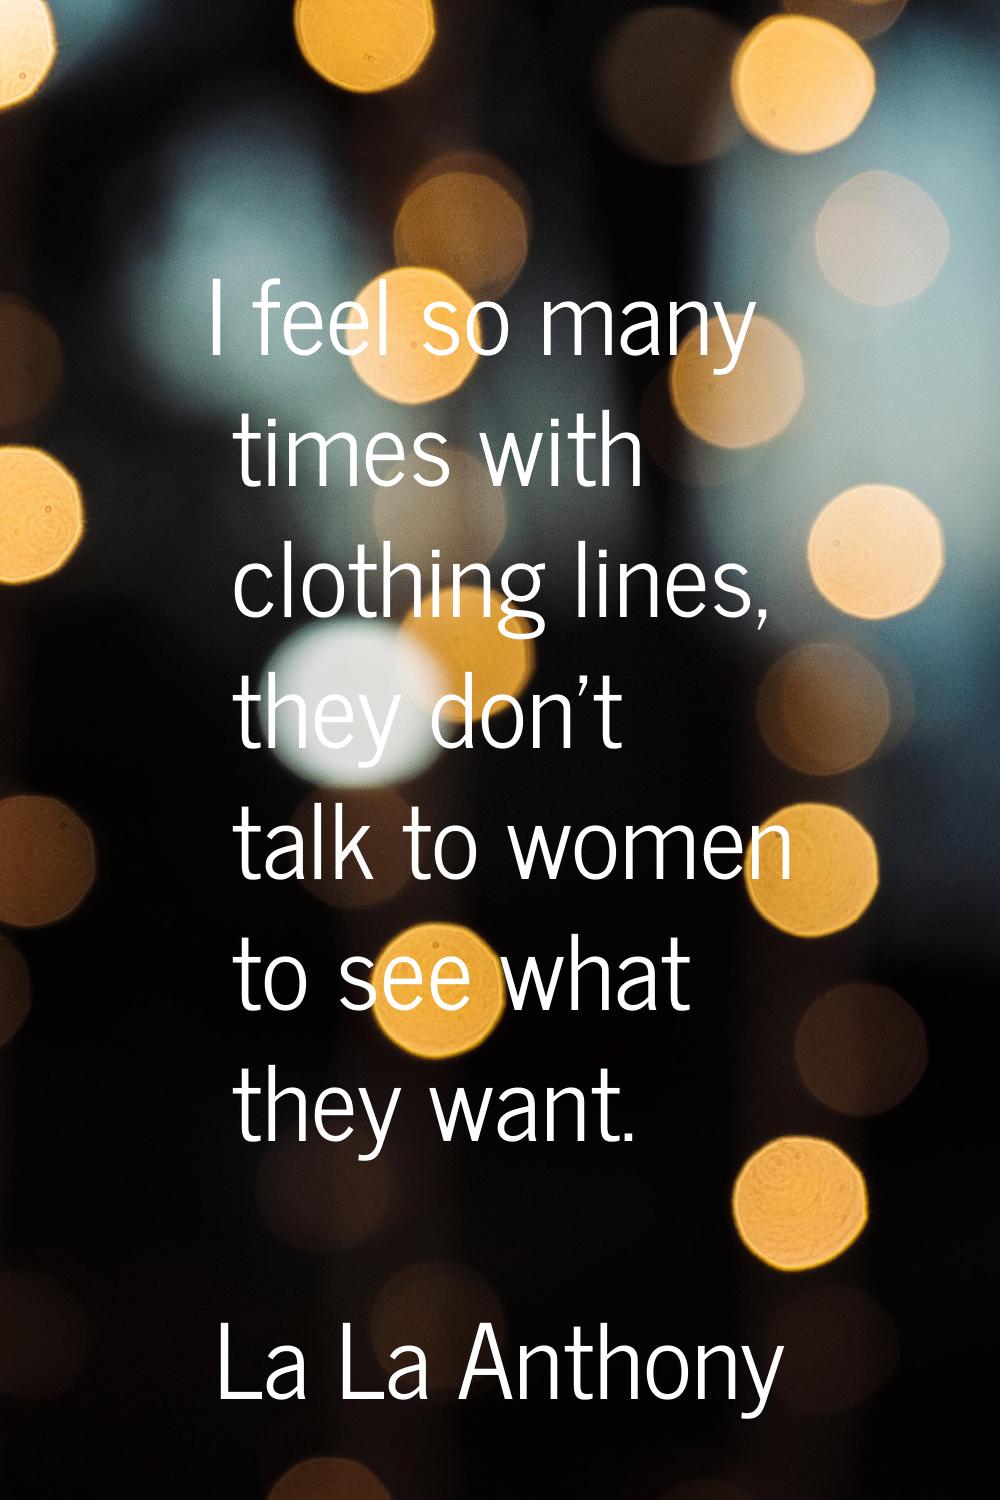 I feel so many times with clothing lines, they don't talk to women to see what they want.